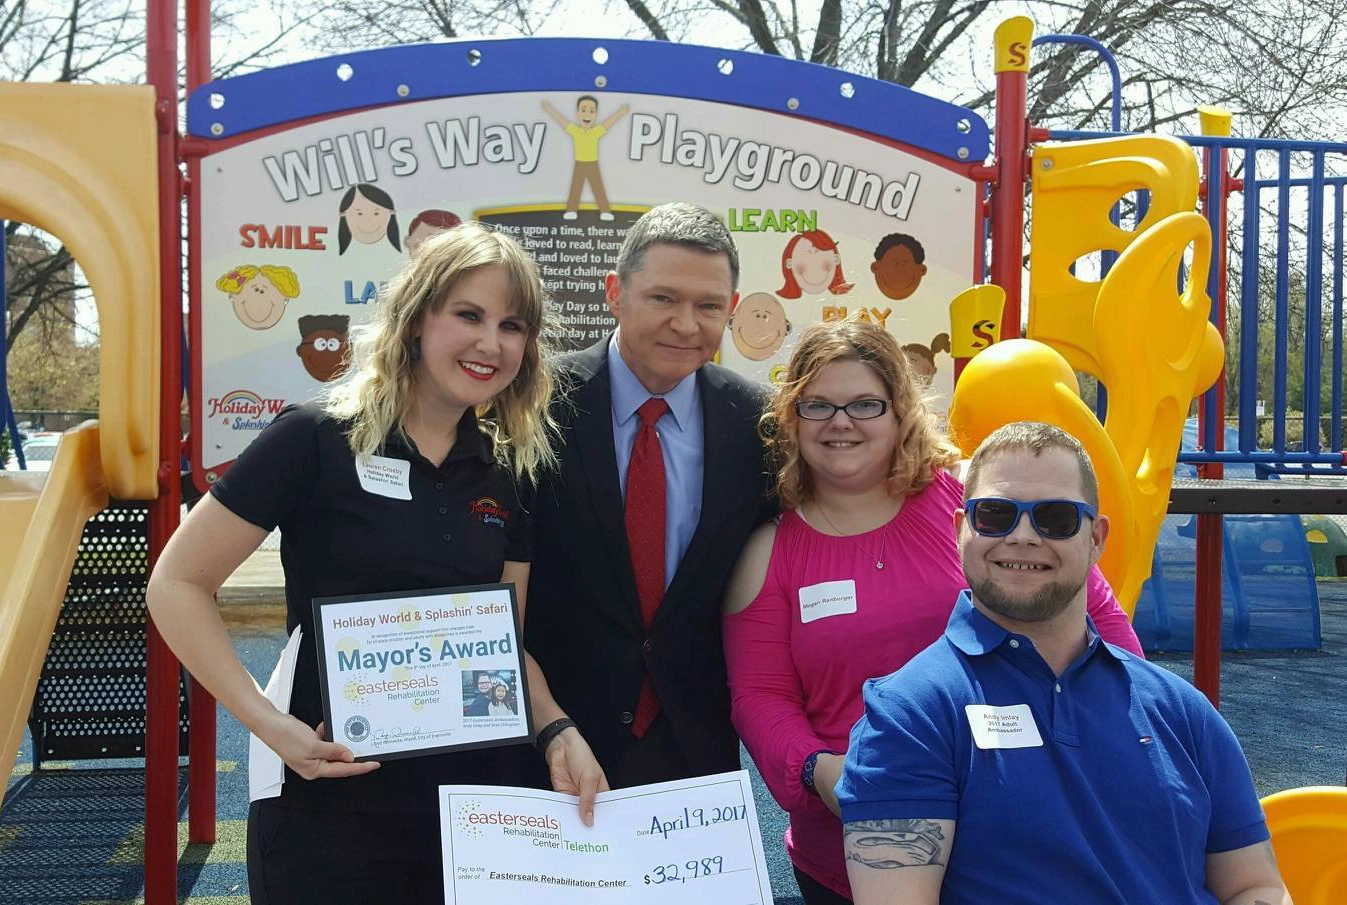 Lauren Crosby, 4th Generation Owner, poses in front of Will's Way Playground, an accessible play structure, with representatives of Easterseals Rehabilitation Center in Evansville, Indiana.